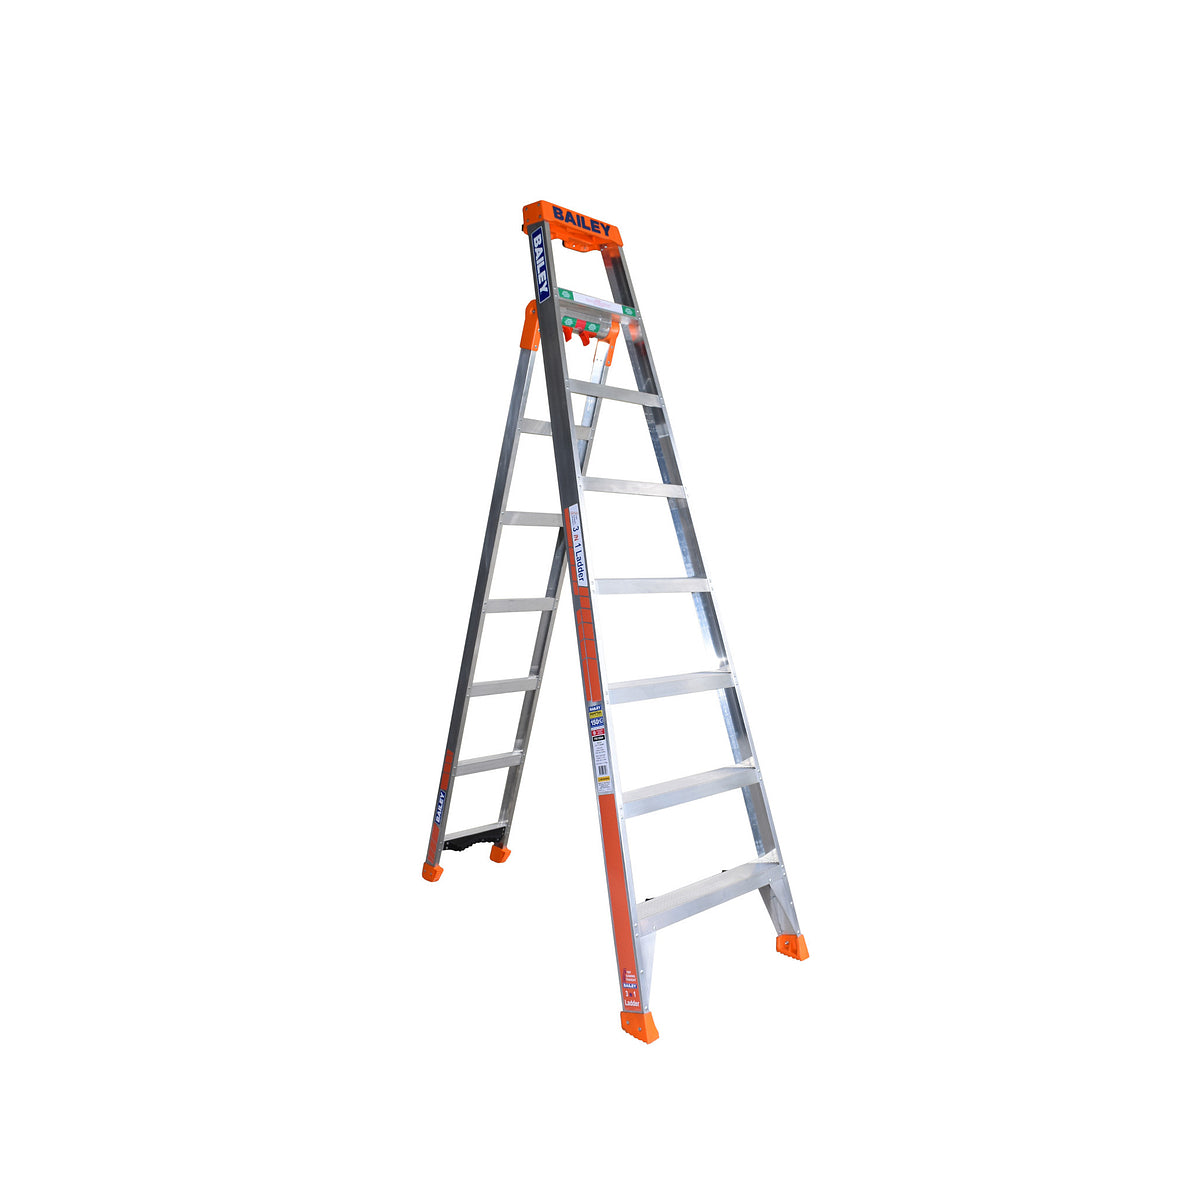 Bailey 3-in-1 Step Leaning Straight Ladder 1.8m, 2.1m, 2.4m 150kg FS1386 by Bailey